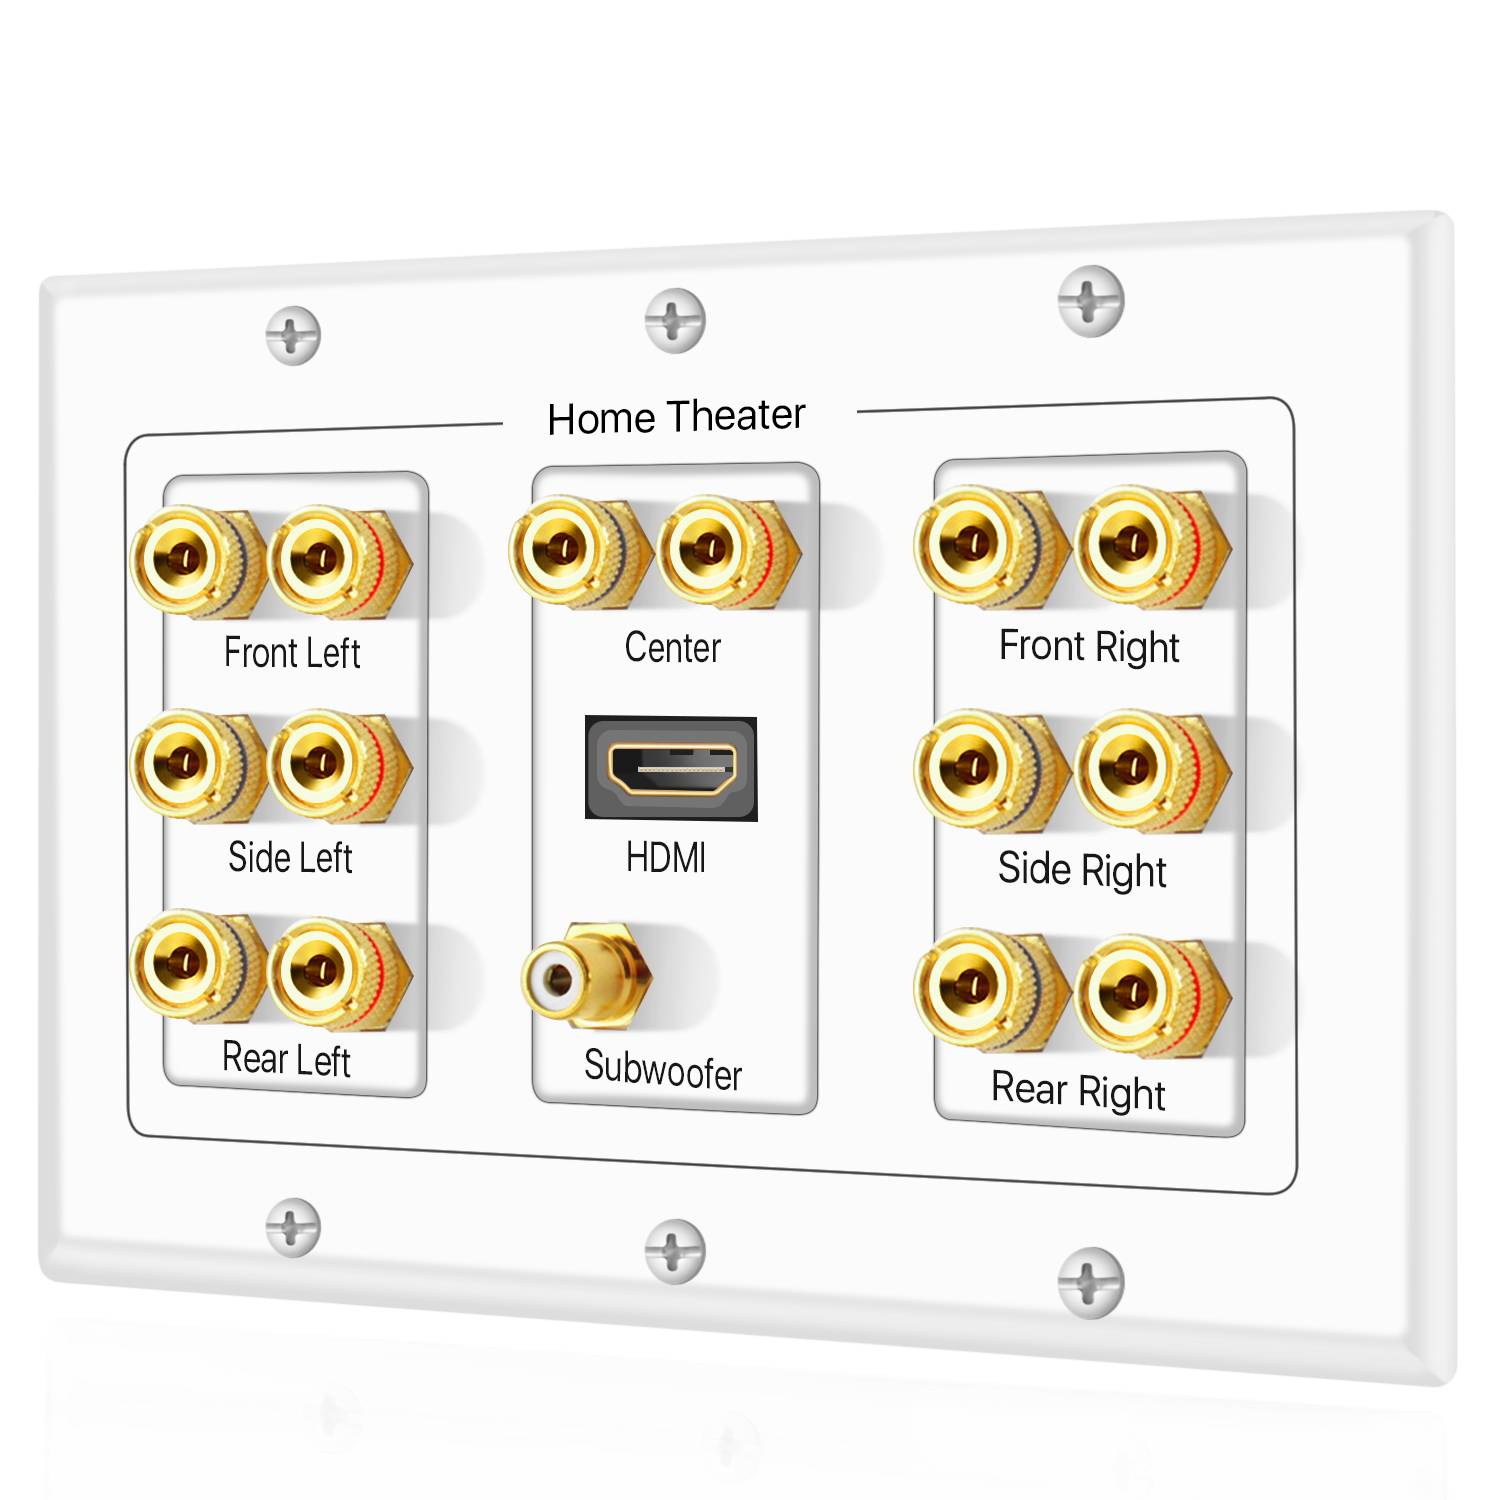 Home Theater Speaker Wall Plate Outlet - 7.1 Surround Sound Audio Distribution Panel, Gold Plated Copper Banana Plug Binding Post Coupler, RCA LFE Jack for Subwoofer, HDMI 4K ARC/eARC Full HD (3-Gang) - image 3 of 5